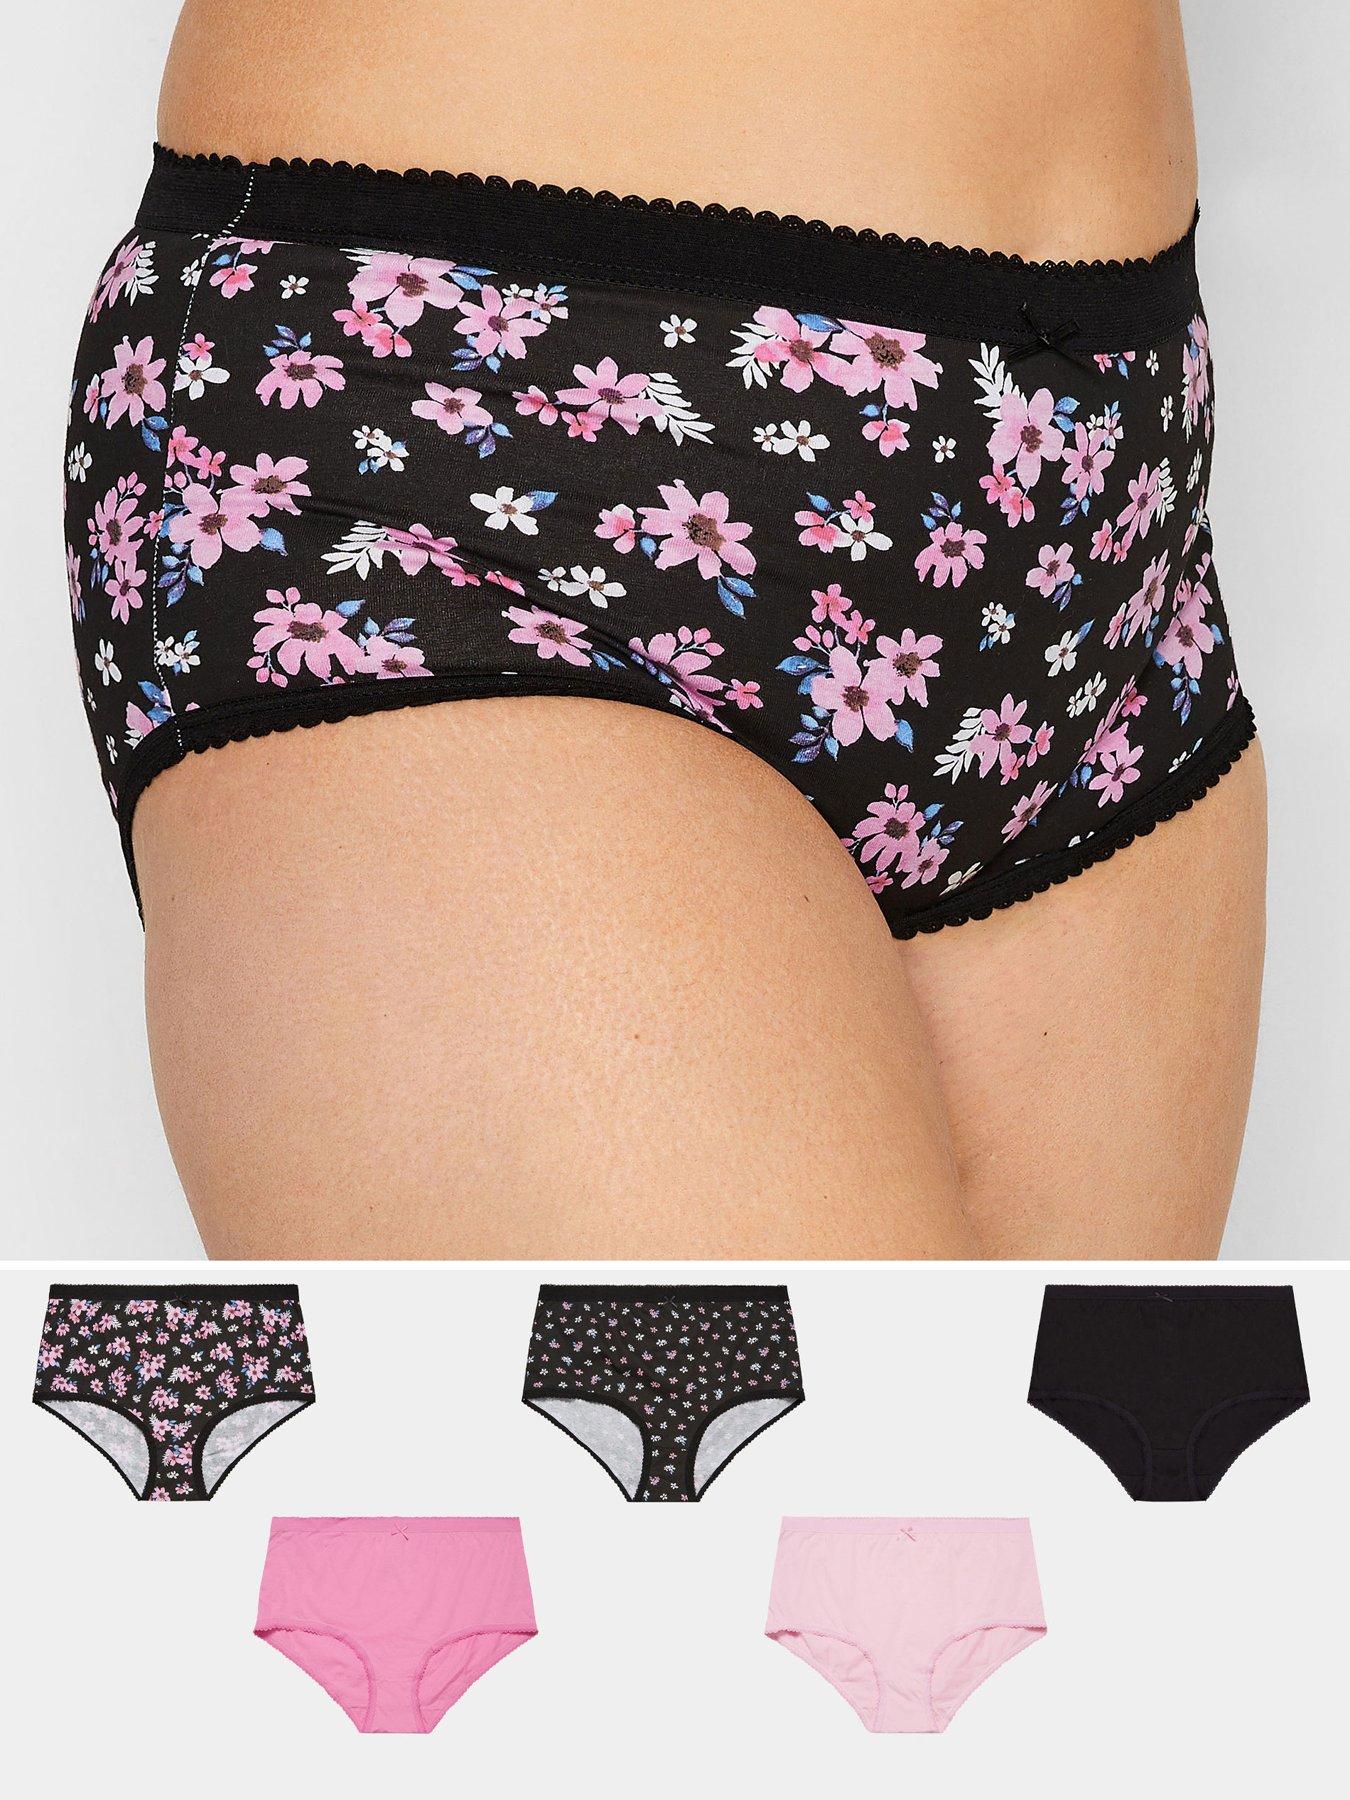 Patterned Mini Knickers 5 Pack, Lingerie